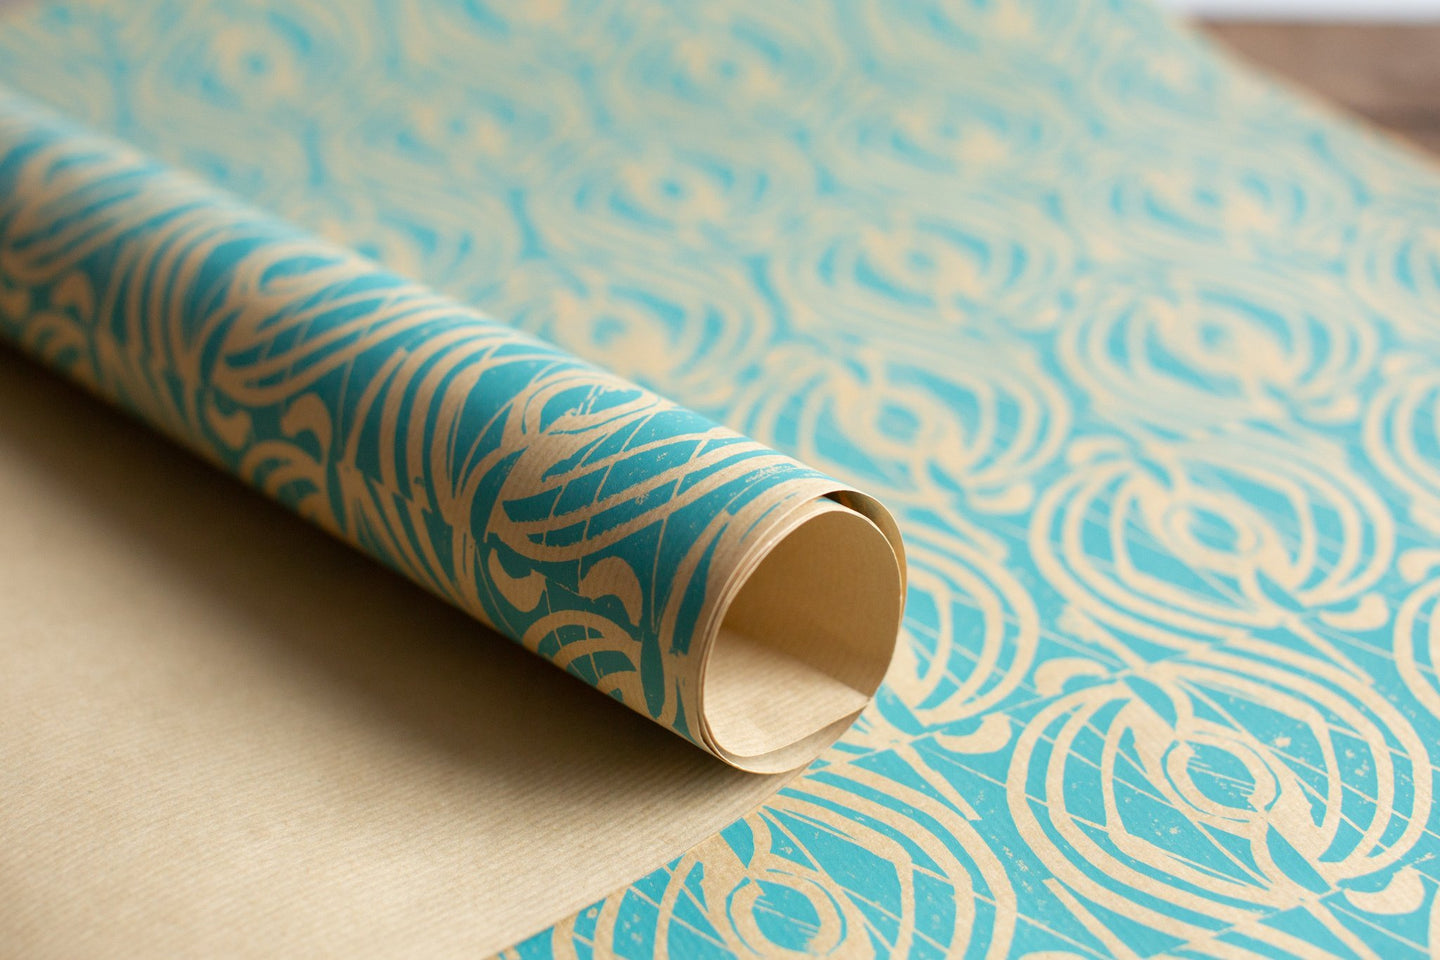 Spinner patterned paper, designed by Mark Hearld for the Penfold Press